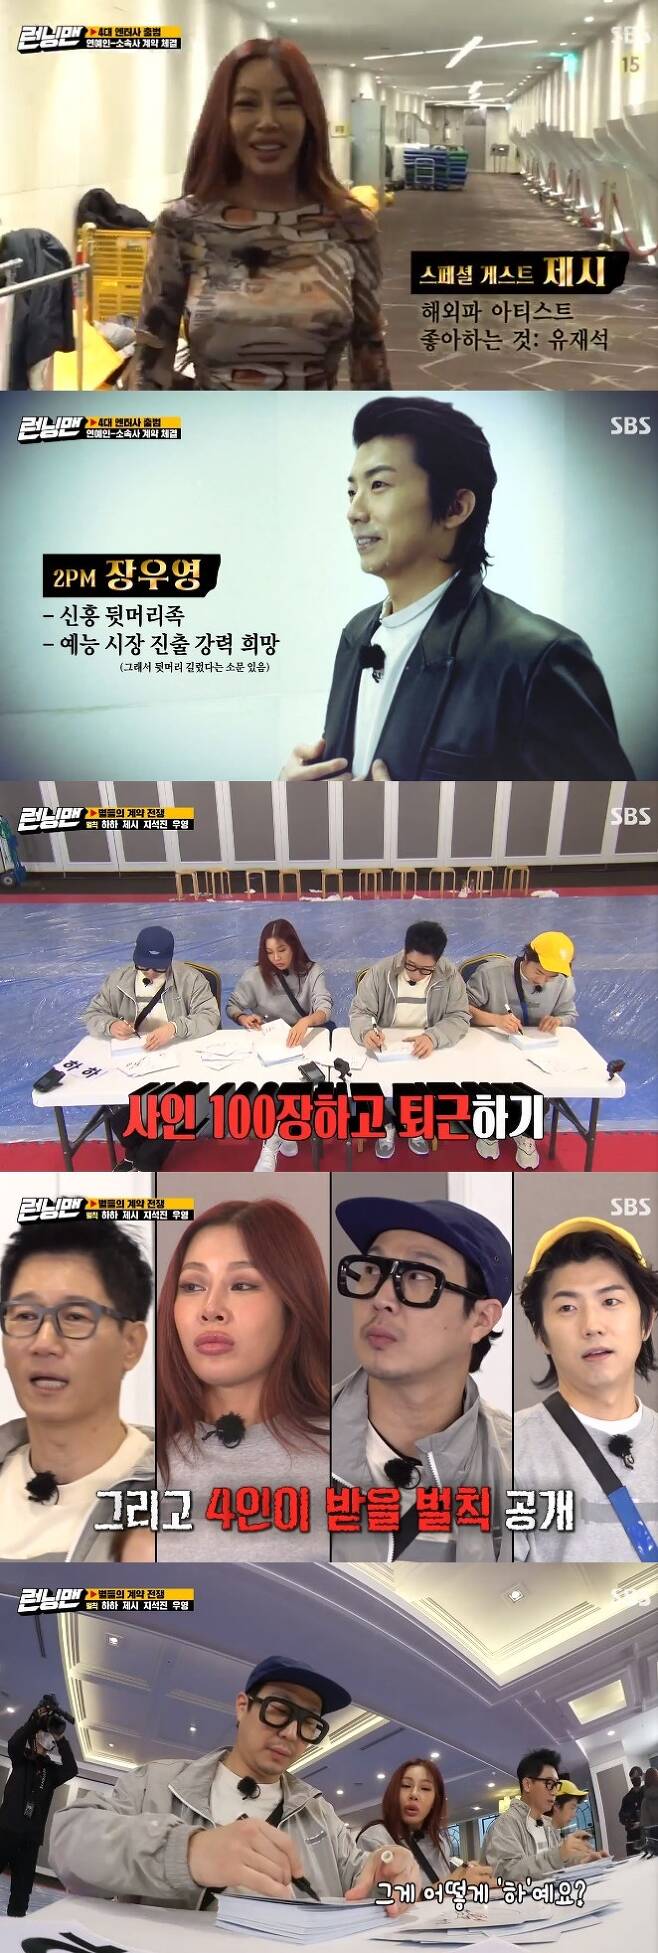 SBS Running Man, which was broadcasted on the afternoon of the 28th, was divided into four representative entertainment companies and six entertainers, and was decorated with a race to fight a contract war.Ji Suk-jin Jeon So-min Lee Kwang-soo Haha, who was the entertainment representative, tried to recruit entertainers to his company.Ji Suk-jin bought his heart, saying that the top star of Running Man was Kim Jong-kook, not Yoo Jae-Suk.He did contract with Kim Jong-kook, Song Ji-hyo, at a profit ratio of 8.5 to 1.5.Yang Se-chan told Lee Kwang-soo: I just have to get rid of the eye-watering - the back of that head is intrusive.If you cut it neatly, you can do the contract book 6 to 4. As news of another companys Contract came on the heels, Lee Kwang-soo replied, Ill cut the back hair; Lee Kwang-soo took the scissors himself and cut the back hair.What is the importance of this back hair? I can shave it, he said to the surprised Yang Se-chan, laughing, saying, I will kill you if you change the company.Jessie and Wooyoung appeared after the Running Man members appeared as stars on the day.Jessie, introduced as a jamstone-wisher, hugged Yoo Jae-Suk as soon as she appeared.Wooyoung then appeared, so Jeon So-min appeared and tried to buy his heart by dancing 2PM.Wooyoung is embarrassed that he is in the first place with Jeon So-min. However, he signed a contract with Jeon So-mins company and teamed up together.Were skinship entertainment - we have to stay close like a family, said Jeon So-min.Wooyoung laughed as if surprised by the unique style of Jeon So-min, saying that the headache was coming.Before the final commission, they held a contract discussion.Haha laughed at the situation, saying that Kim Jong-kook Song Ji-hyo kept the secret love of two people.Following the quiz showdown, he played a game to hit the word on his back in a stadium with soapy water.Song Ji-hyo was the overwhelming number one after the feast of the body gag, and Kim Jong-kook was second.Yoo Jae-Suk Yang Se-chan was exempted from the penalty by finishing in the top four; the bottom members went home with a 100-sign penalty for the fans.In the following trailer, the group Brave Girls, which is in the spotlight due to the reverse of the music charts, appeared.They wanted to come out of Running Man, and they attracted attention by burning their body gags and makeup.